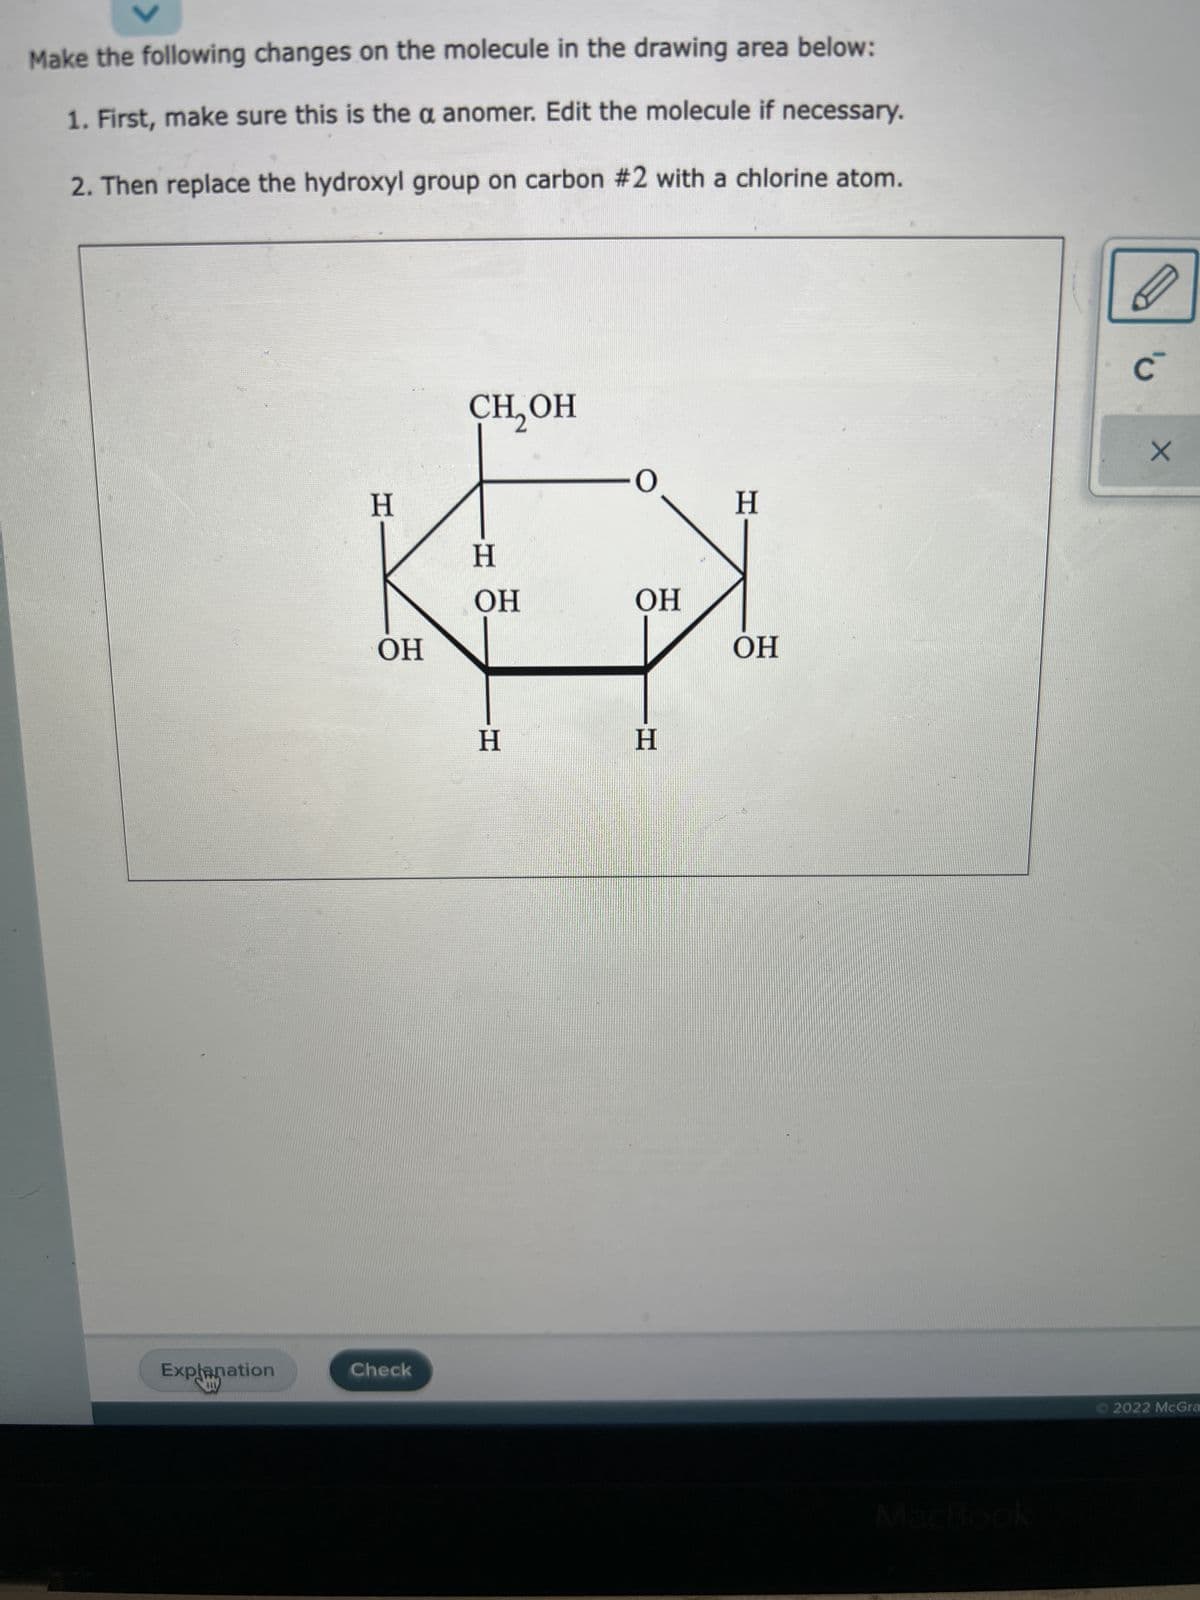 Make the following changes on the molecule in the drawing area below:
1. First, make sure this is the a anomer. Edit the molecule if necessary.
2. Then replace the hydroxyl group on carbon #2 with a chlorine atom.
Explanation
U
H
OH
Check
CH, OH
H
OH
H
-0
OH
H
H
OH
C
X
Ⓒ2022 McGra